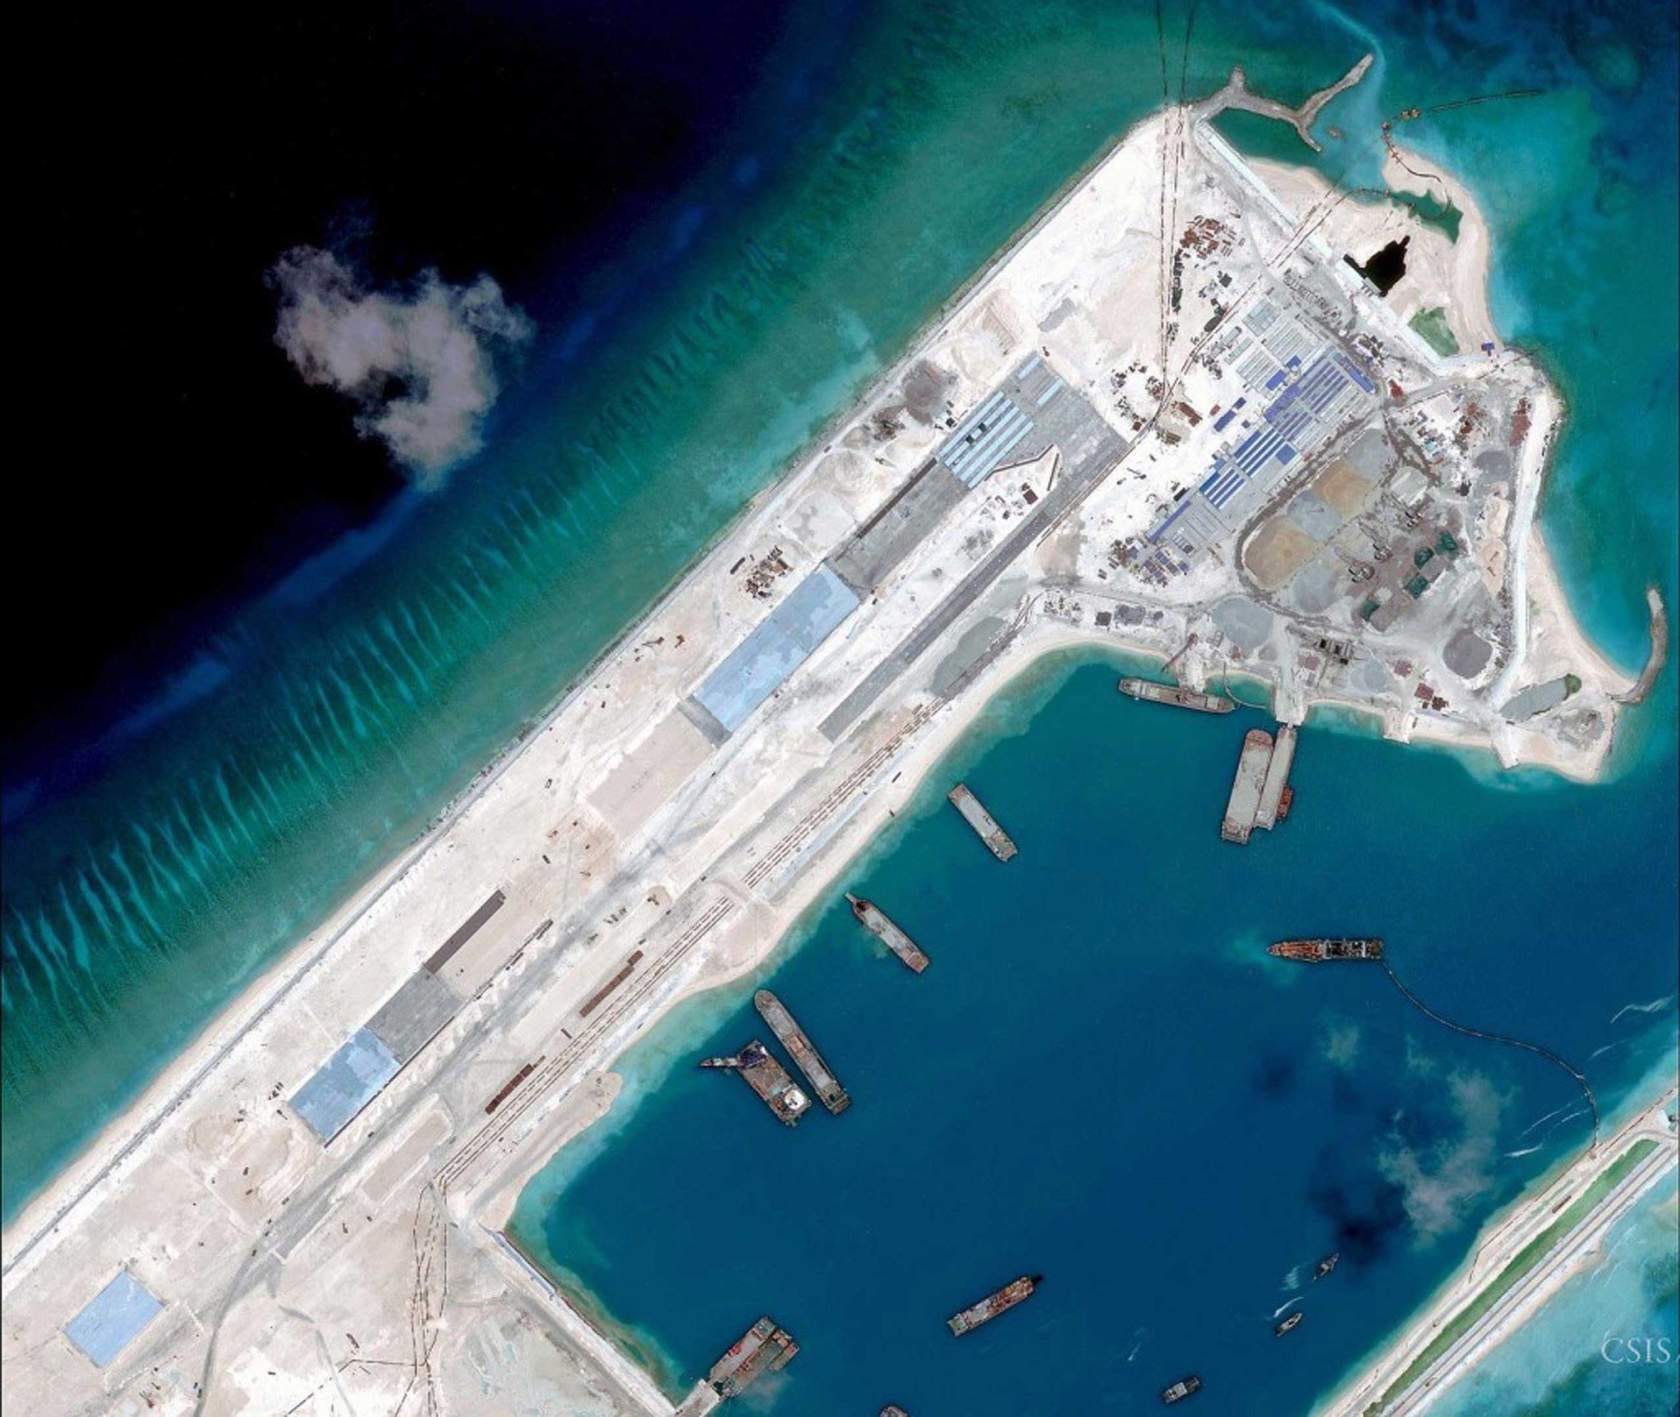 Airstrip on the Fiery Cross Reef in the South China Sea on April 2, 2015. CSIS Asia Maritime Transparency Initiative/DigitalGlobe photo